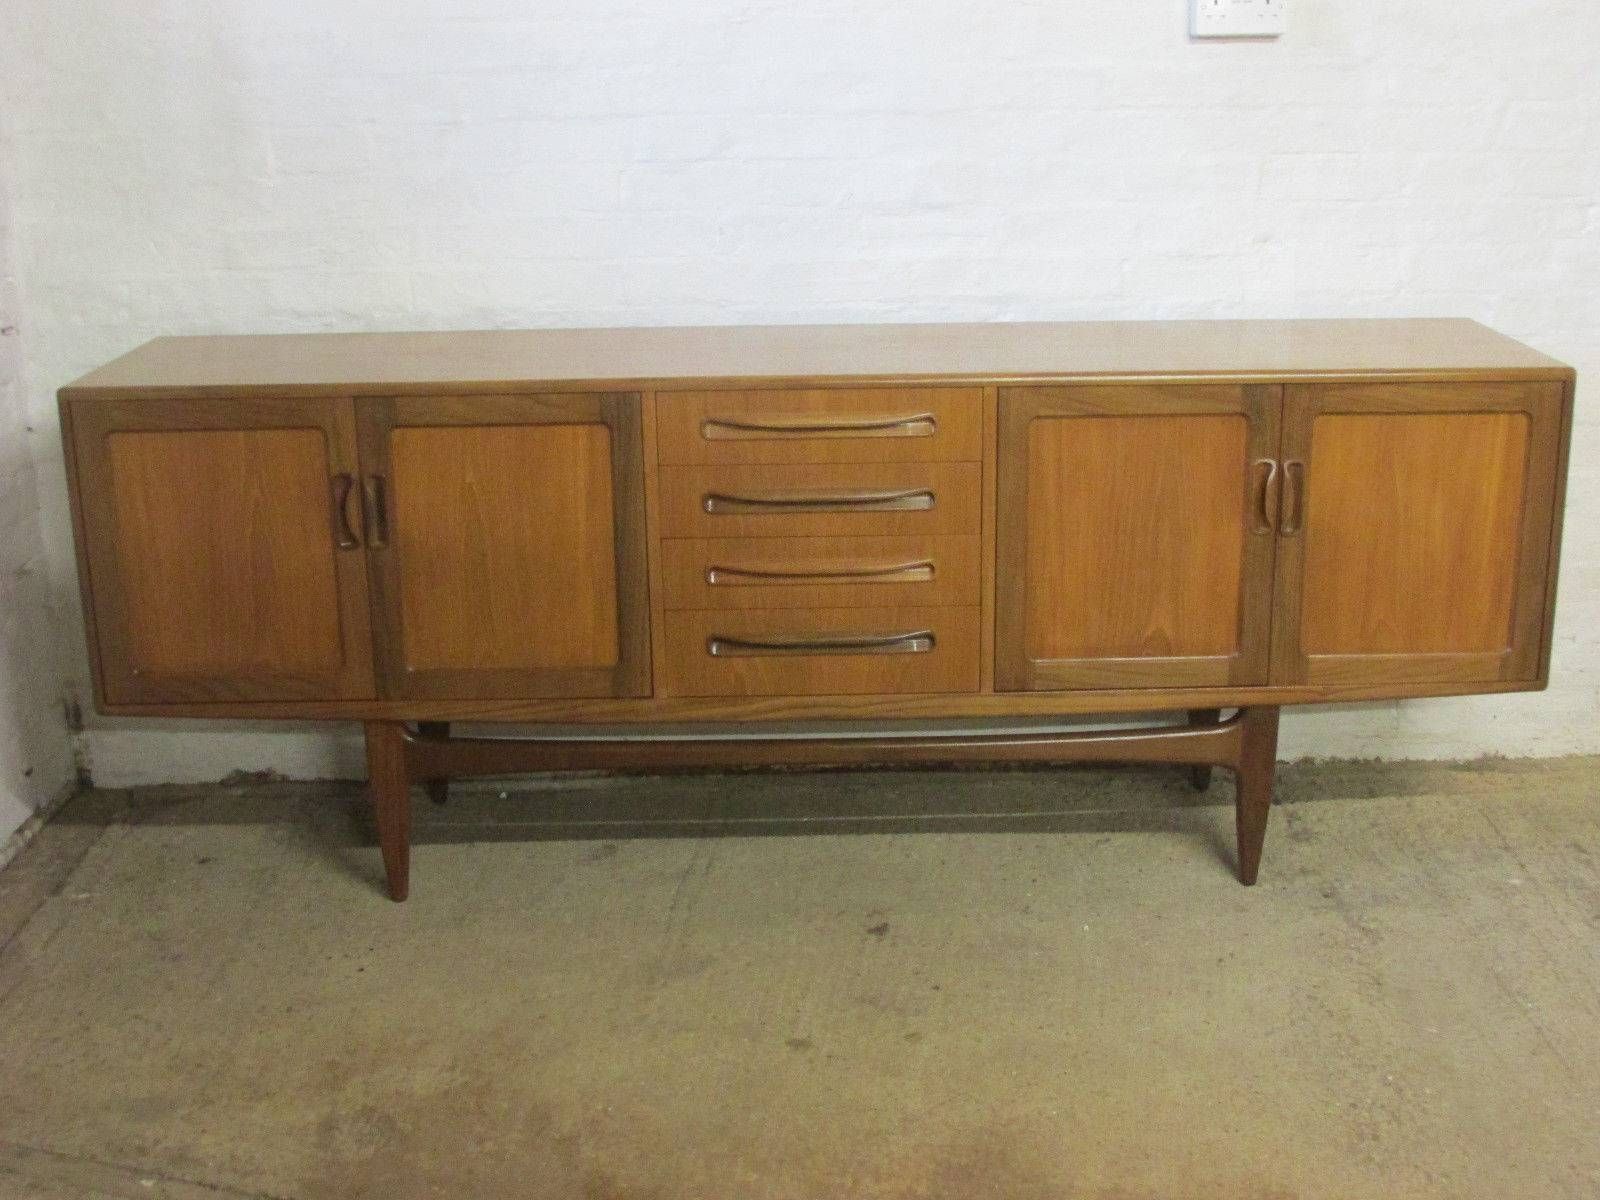 Retro 1960s/1970s G Plan Fresco 7 Ft Teak Sideboard With Cupboards Inside 7 Foot Sideboards (View 11 of 15)